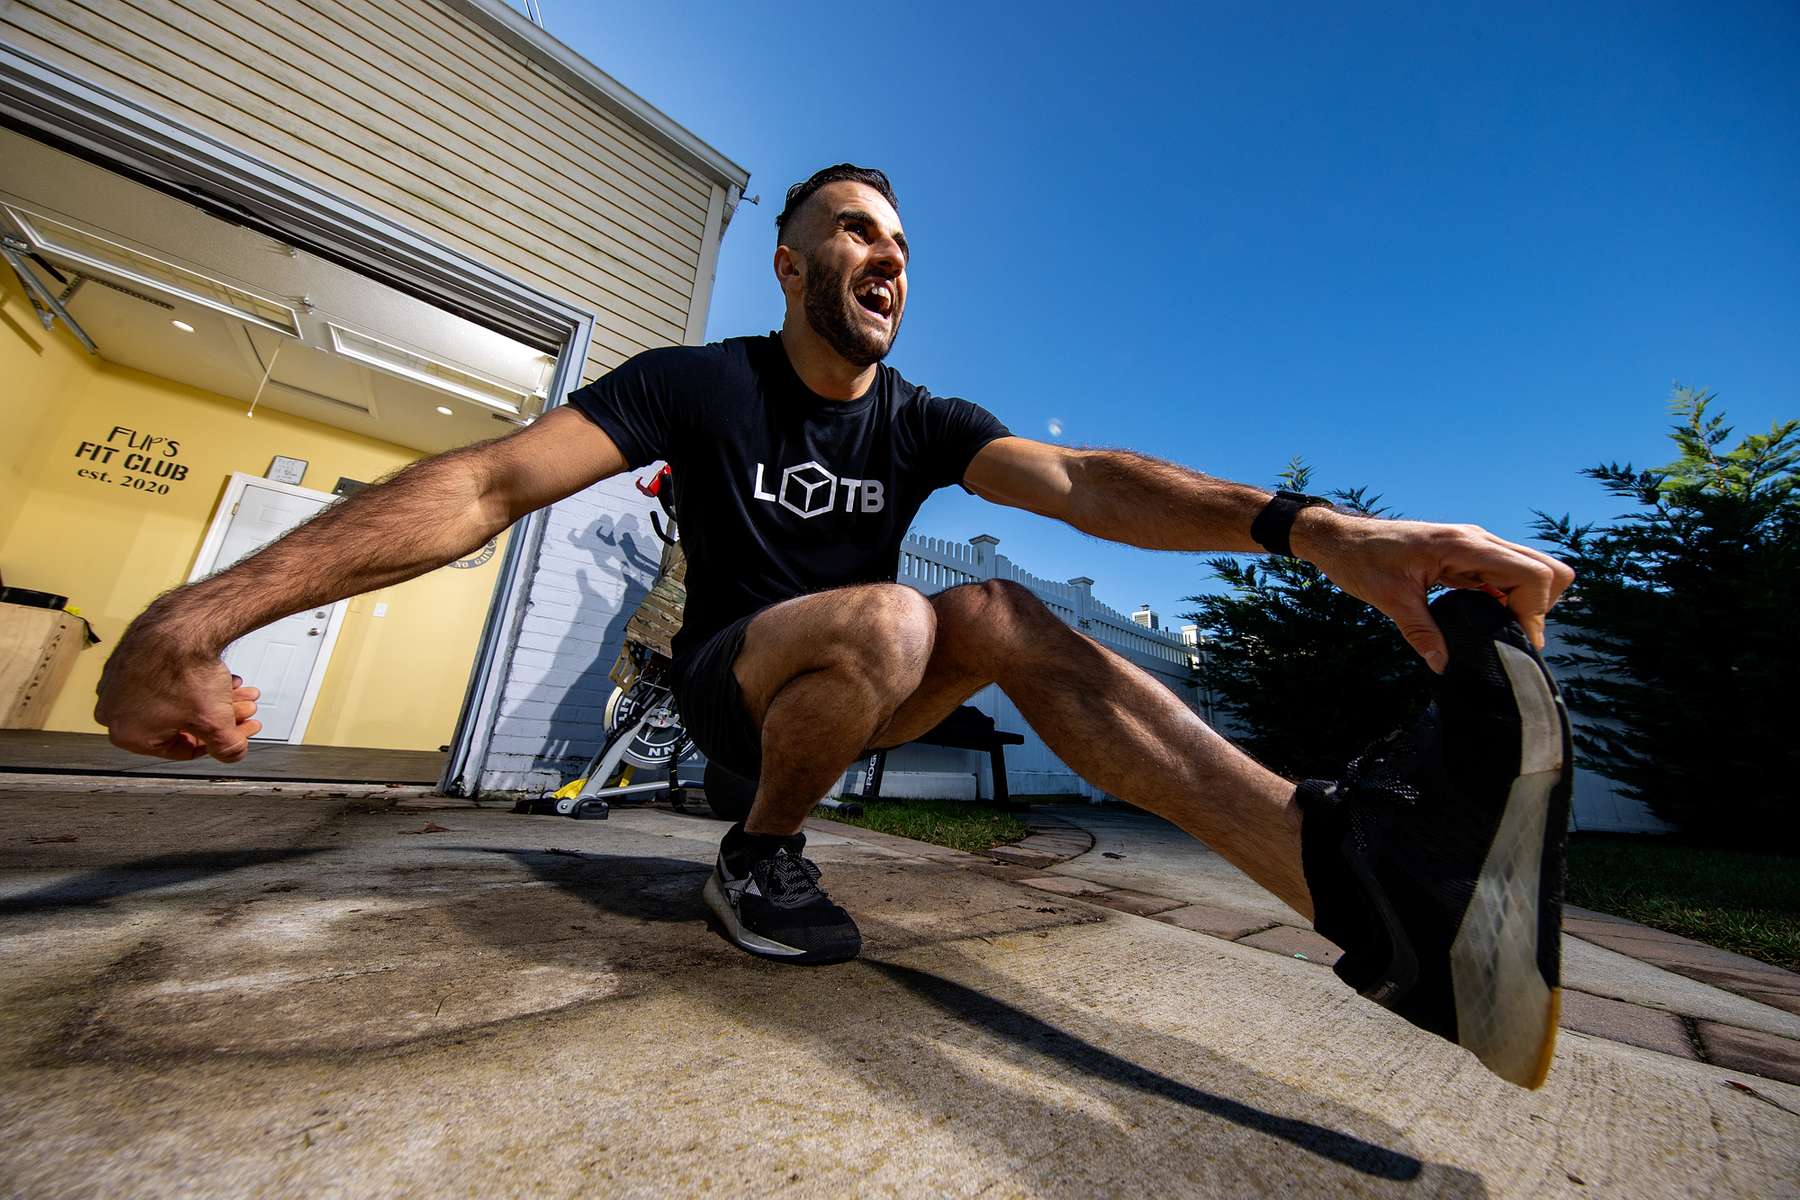 John Puccio exercises outside his friend's garage with his virtual Fitness Trainer Dennis Guerrero on November 14th, 2020 in Oceanside, New York.  In March of 2014, Dennis Guerrero and his business partner opened a gym on Long Island. The pair shared a passion for fitness, a dream of creating a local community of like-minded people and a willingness to take a risk. Over the next six years, hundreds of members experienced and embraced a unique environment that fostered a palpable energy, helping athletes of all ages and abilities reach their potential.  The gym became a place to share achievements, work through losses and overcome illness. But like so many other businesses, it seemingly had no way of overcoming the financial impact and ongoing uncertainty of a global pandemic. With the arrival of Covid-19, the gym shut its doors back in March, with no idea when it would reopen. The owners, though, were far from done. They lent out every piece of equipment they owned to the gym’s members, continued to pay their staff and worked to set up outdoor classes in hopes of keeping their membership active and healthy. As the shutdown stretched on, it became clear that the physical gym was closed for good.  They have since reinvented themselves and are now called Life Outside the Box.  Their business model has changed drastically, and all their workouts have gone virtual.  The workouts are conducted by a small group of fitness trainers led by Guerrero.  The members pay a monthly fee and can take live Zoom fitness classes.  They are coached by the virtual trainers in real time.  More and more people have reconstructed their garages, spare rooms, backyards, and basements into home gyms since the COVID-19 pandemic hit the United States. 